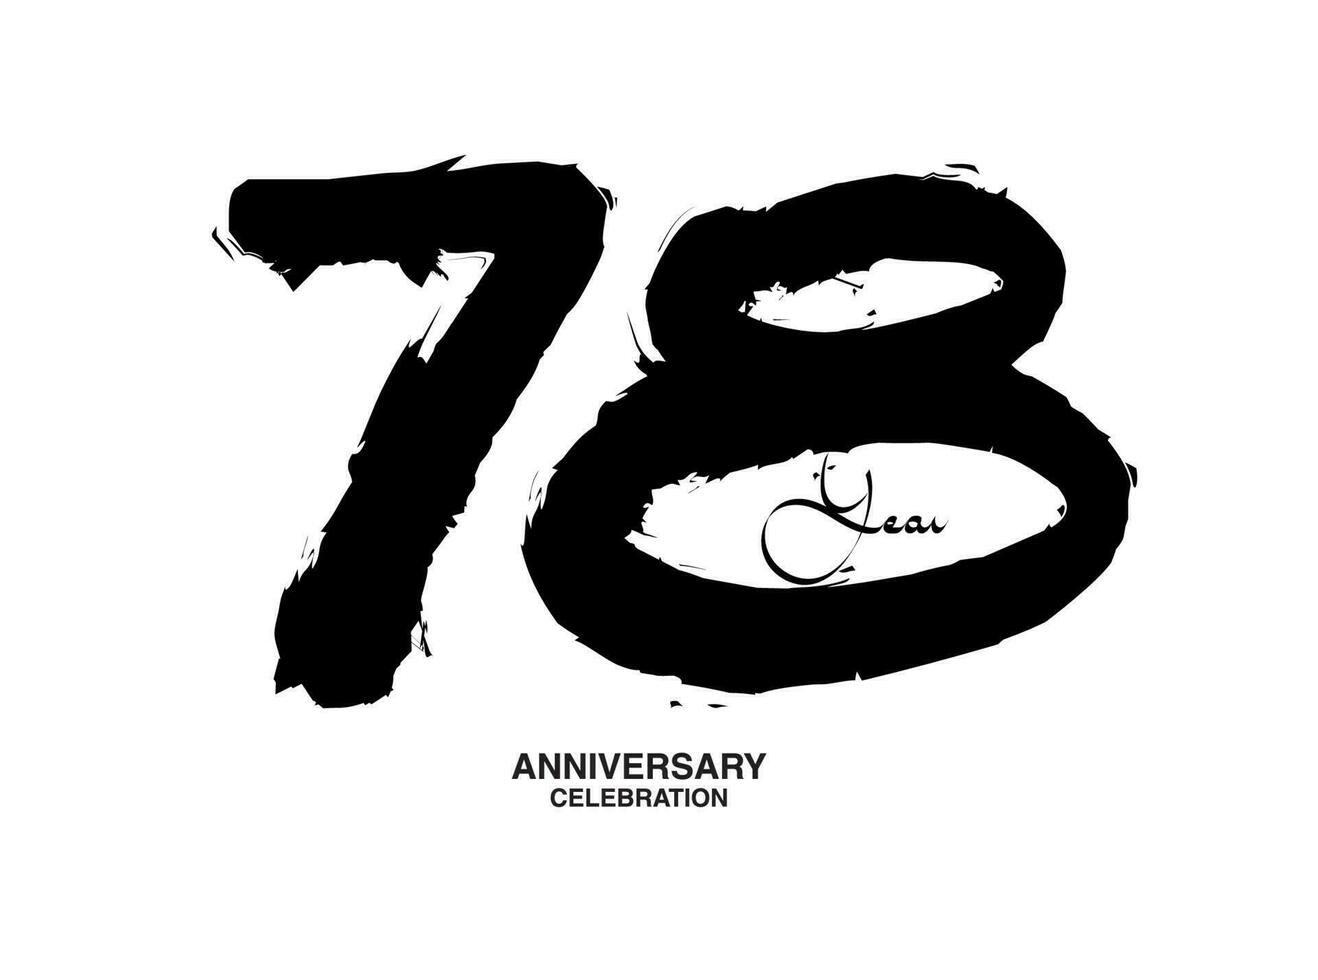 78 Years Anniversary Celebration Vector Template, 78 number logo design, 78th birthday, Black Lettering Numbers brush drawing hand drawn sketch, black number, Anniversary vector illustration